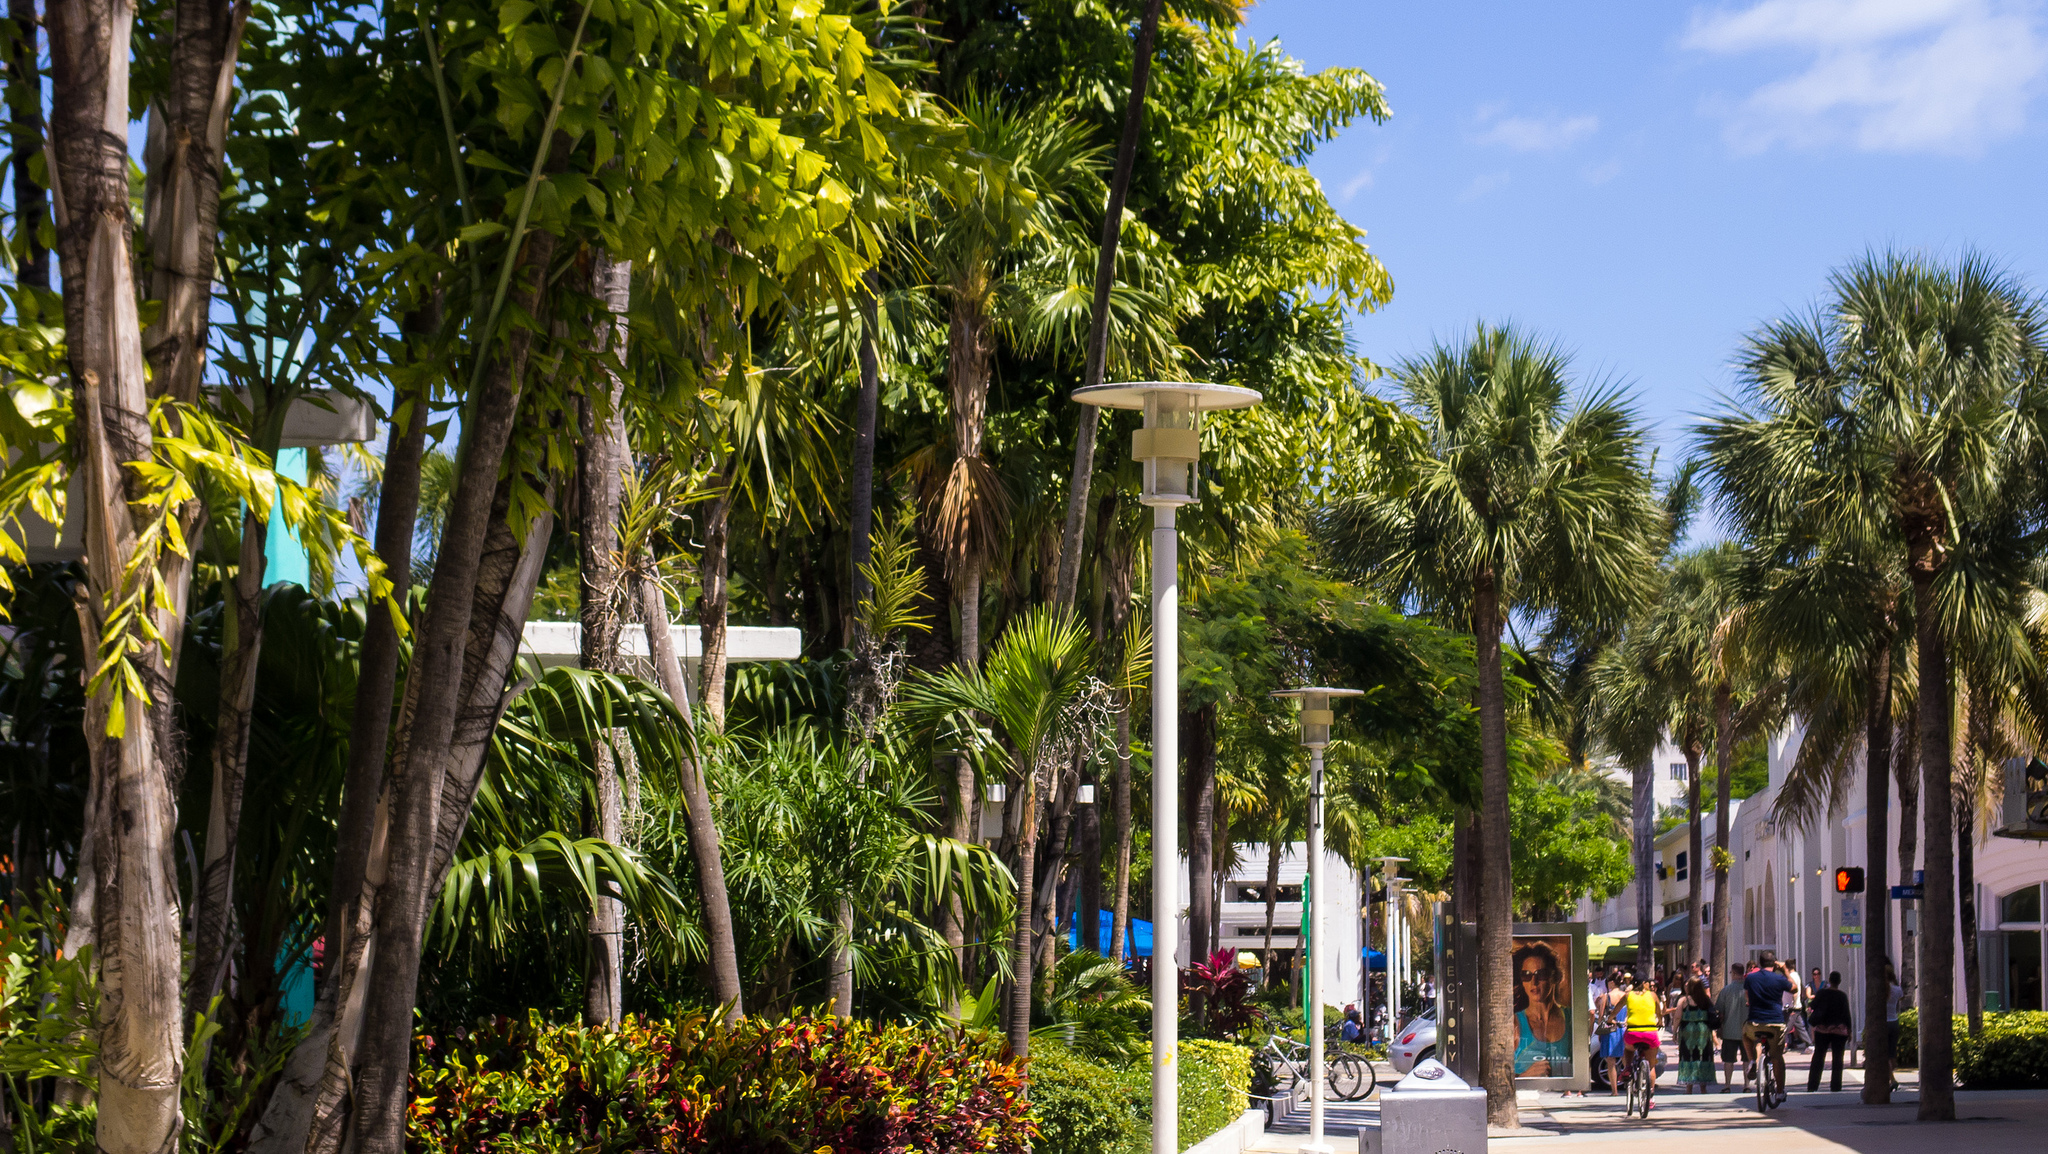 Lincoln Road Mall (Photo: Ed Webster via Flickr)